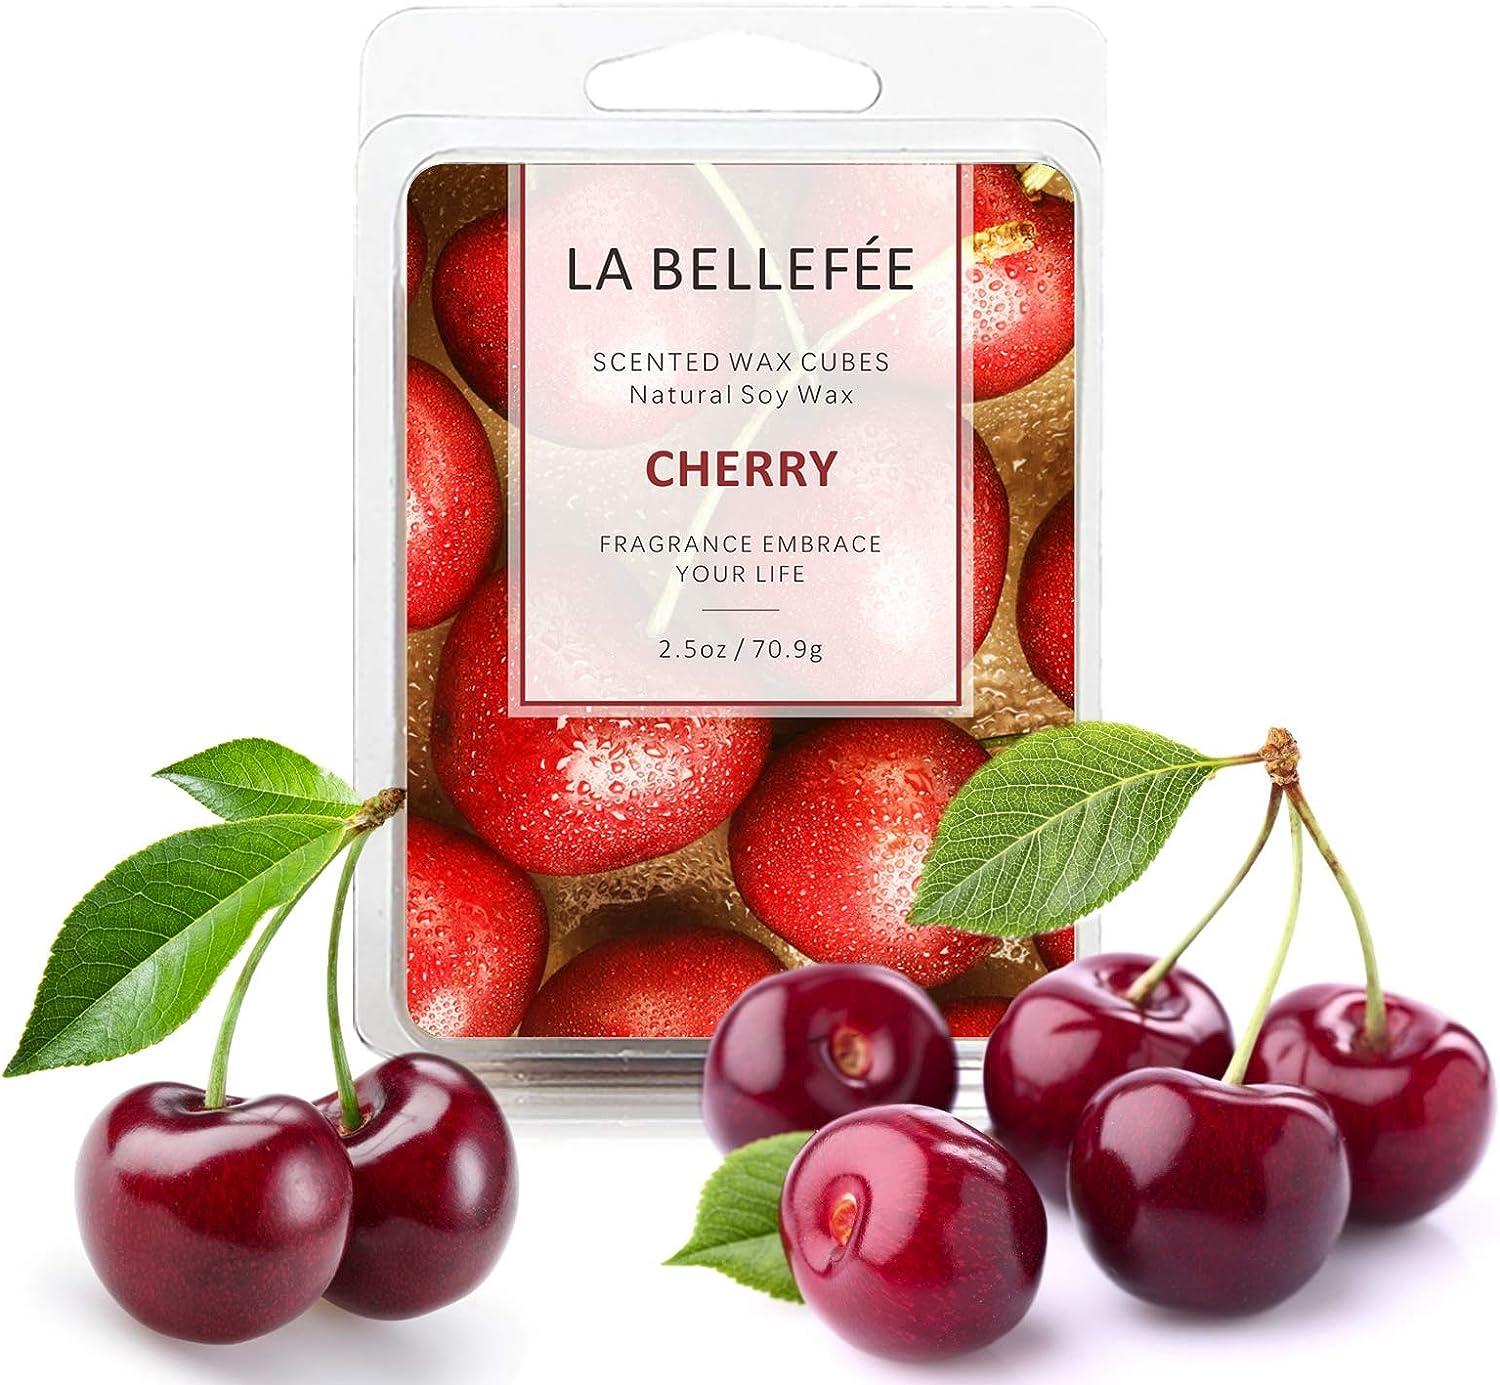 LA BELLEFÉE Scented Wax Melts Natural Soy Wax Cube for Warmer